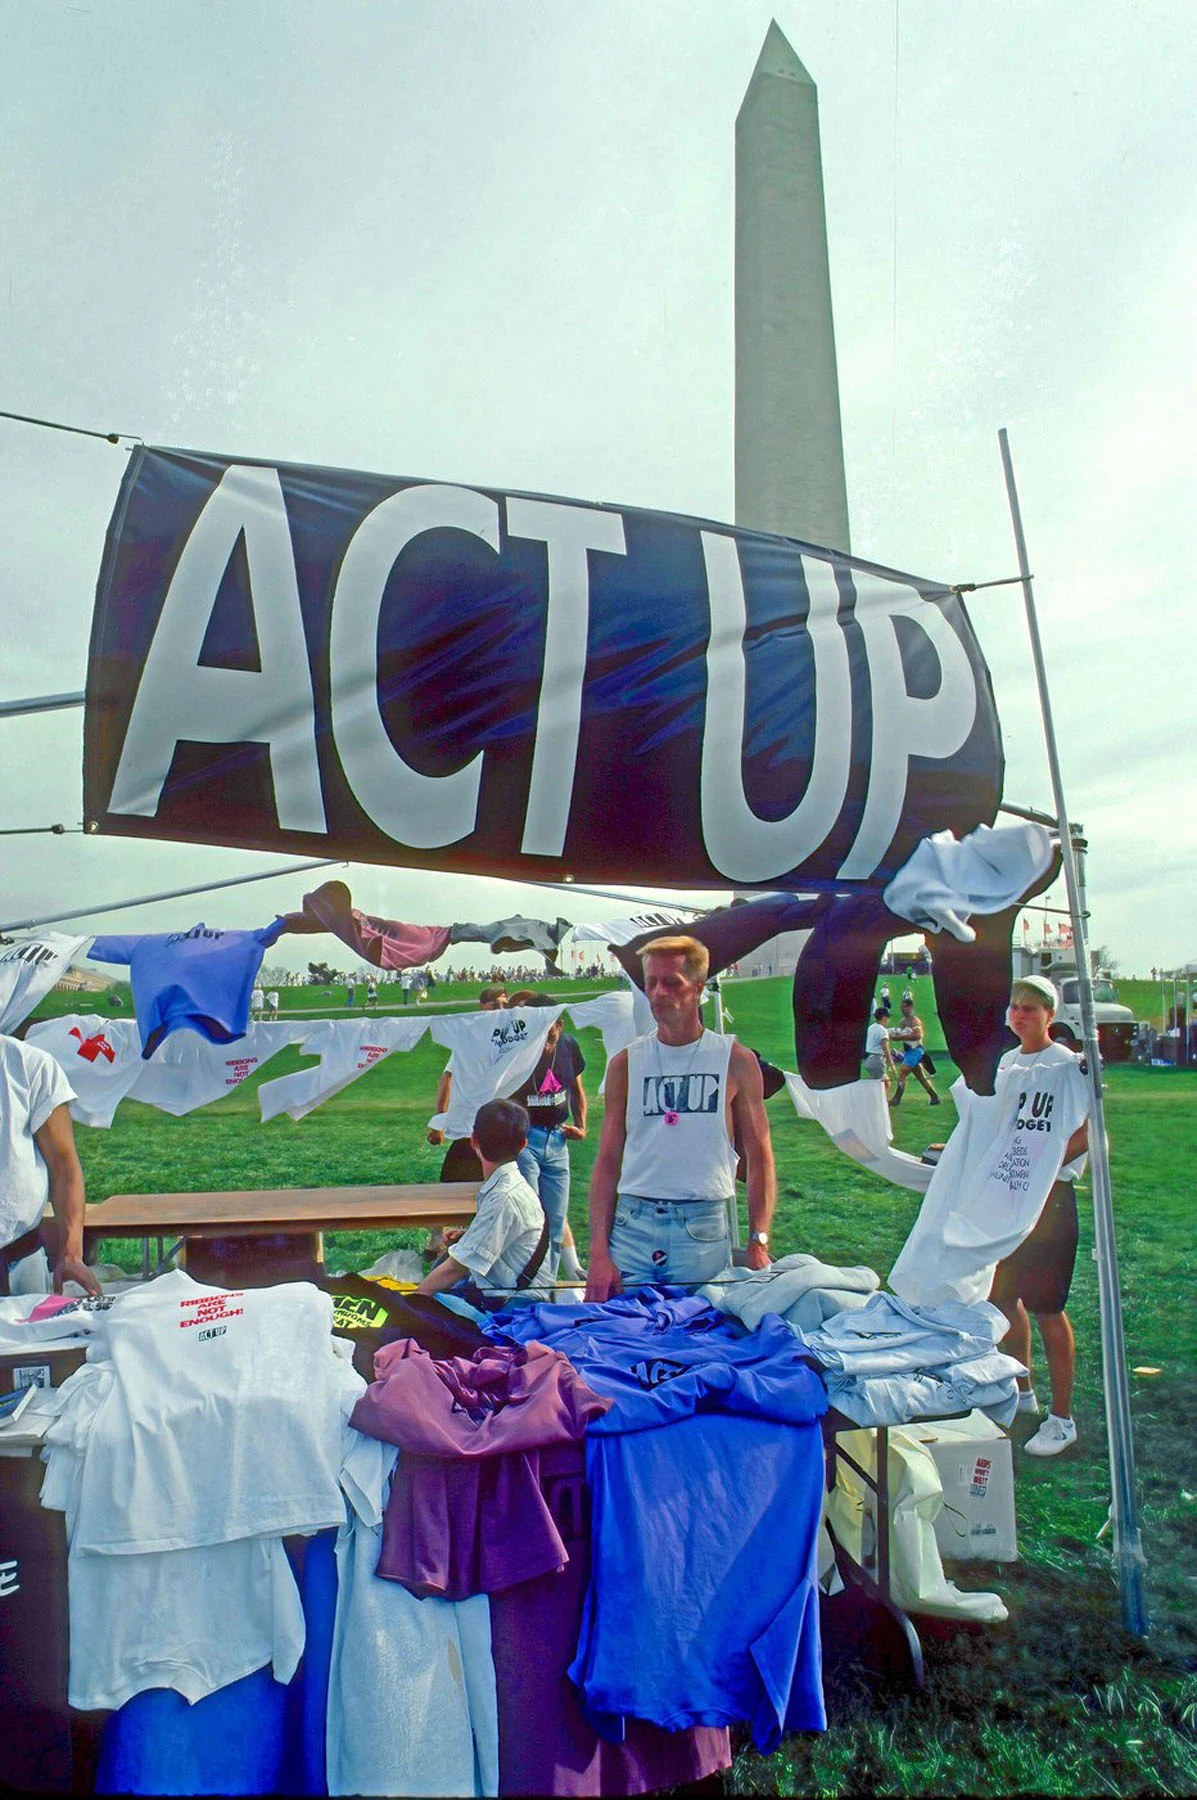 A color photograph of a man wearing a sleeveless white shirt with the black ACT UP logo across his chest. He stands behind a table laden with T-shirts, under a large “ACT UP” sign. The Washington Monument is visible behind them.